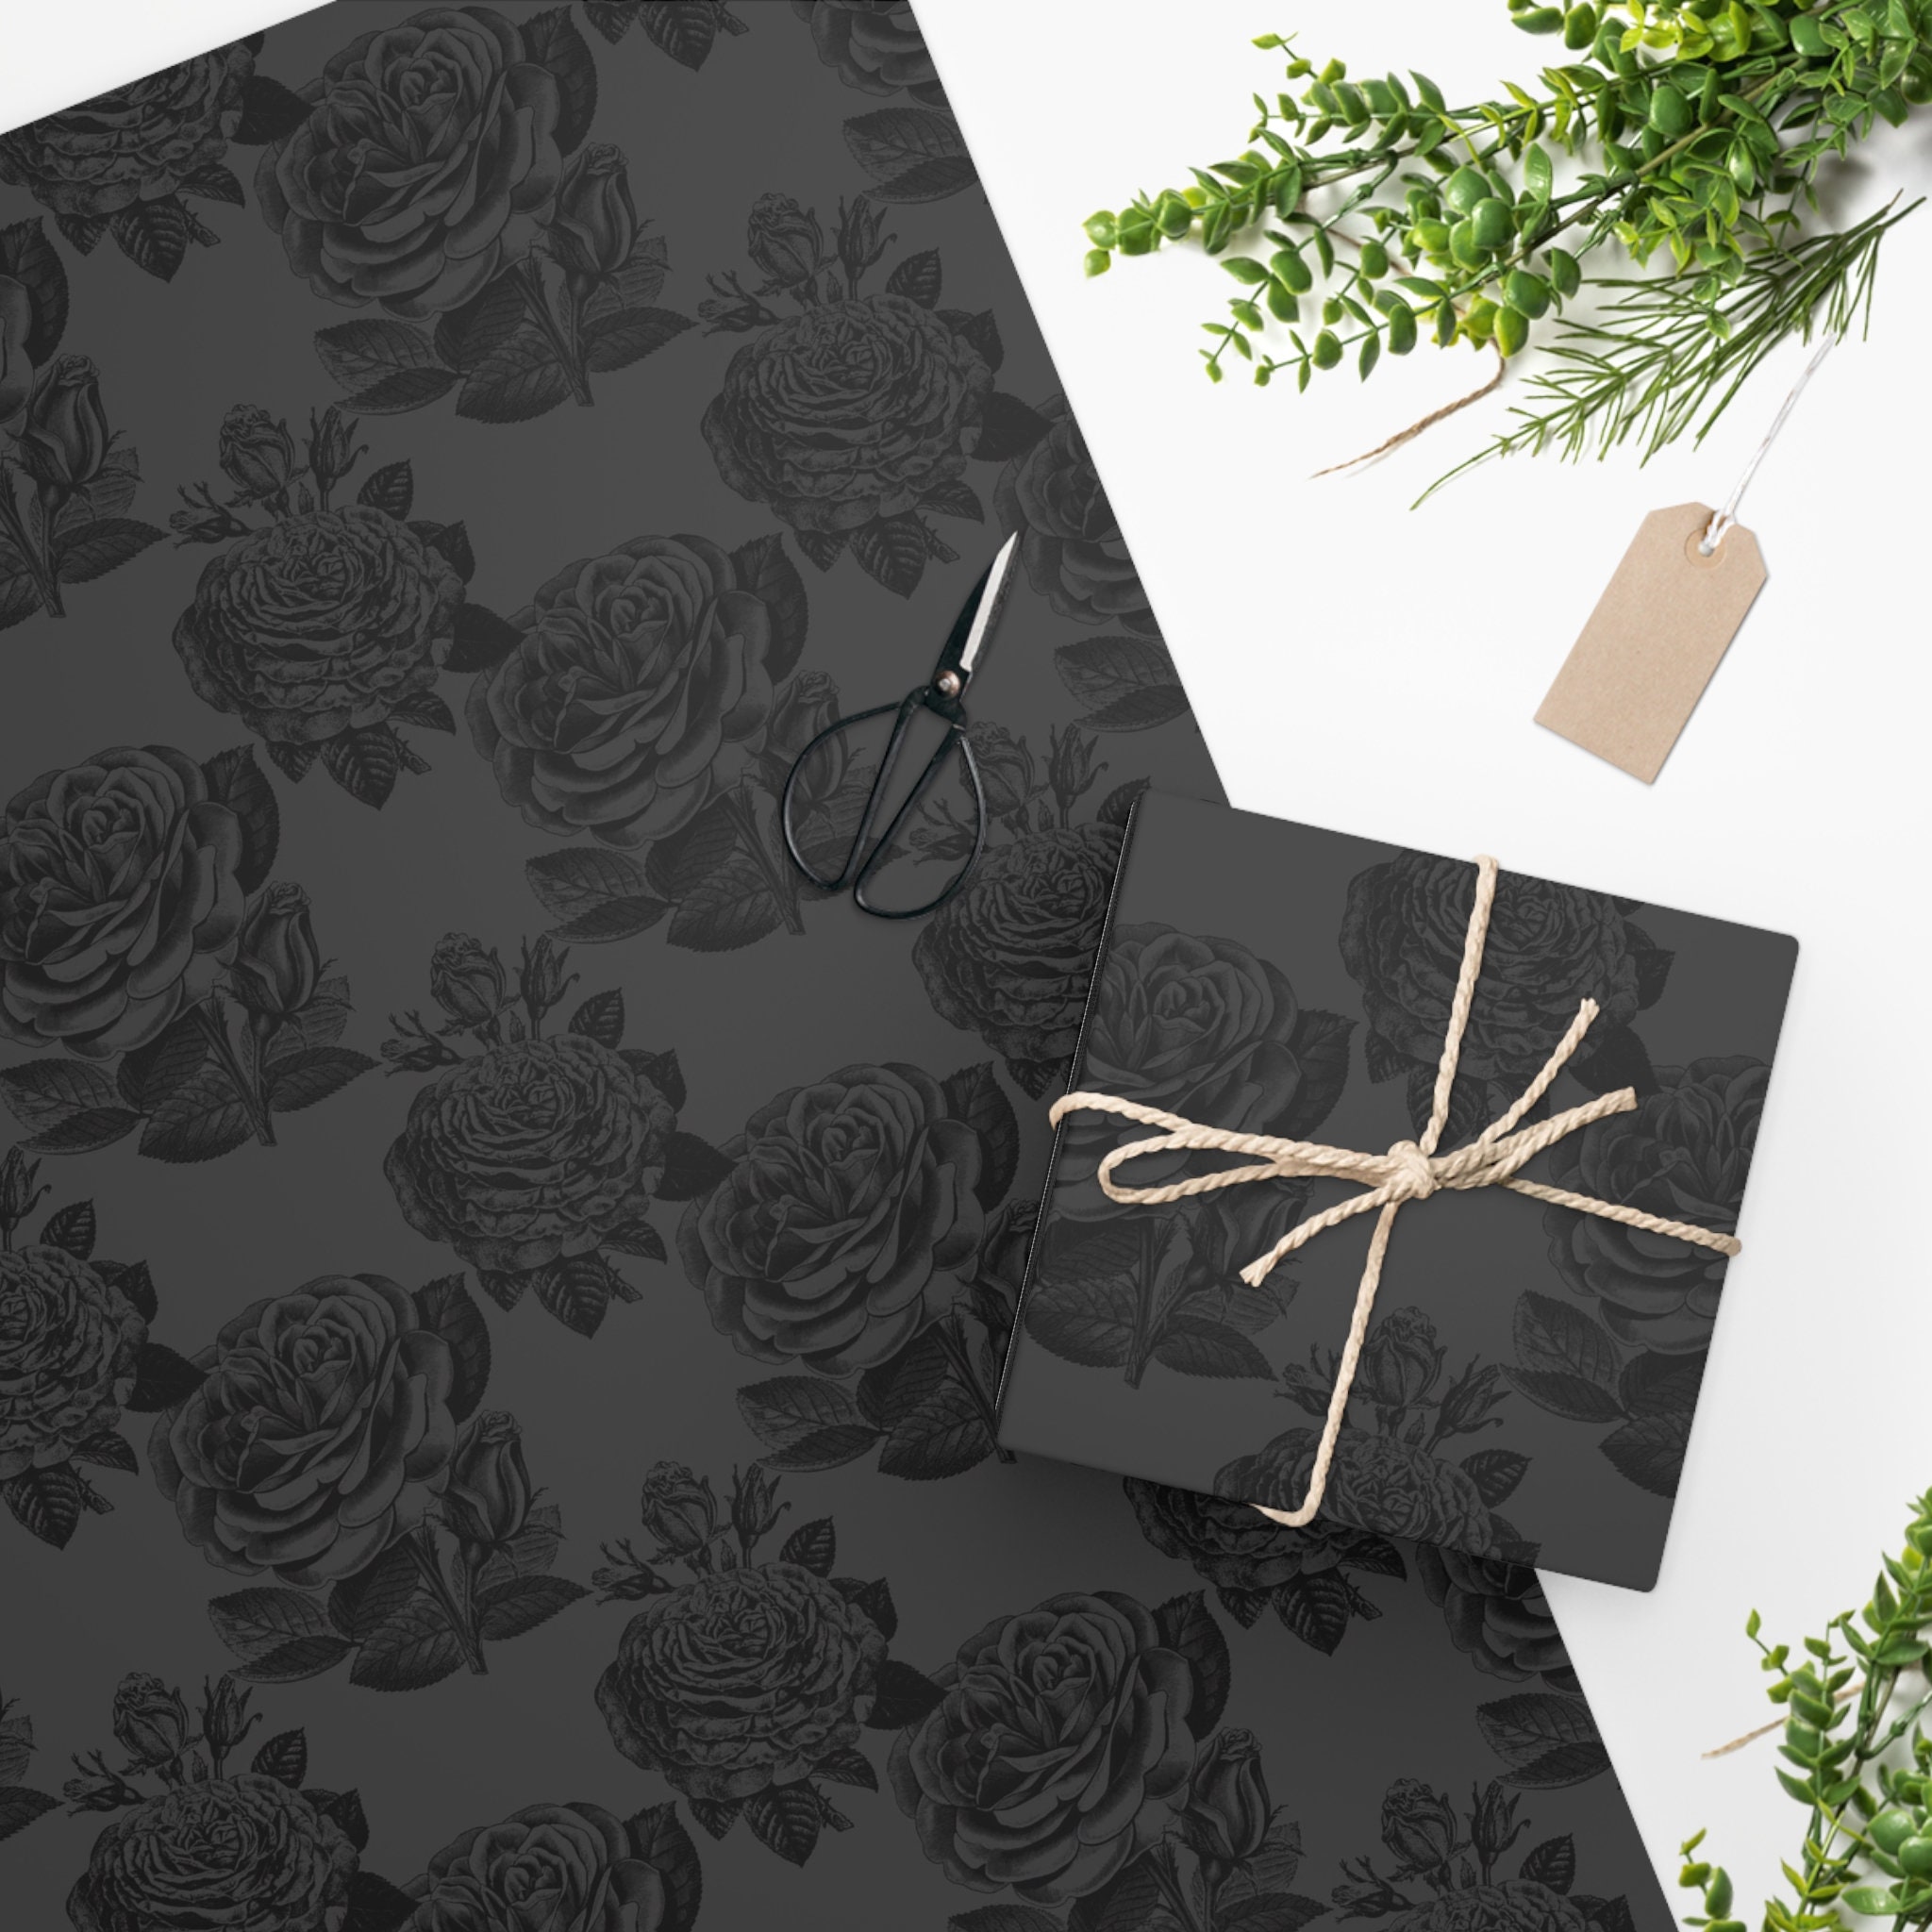 Buy flower wrapping paper Products At Sale Prices Online